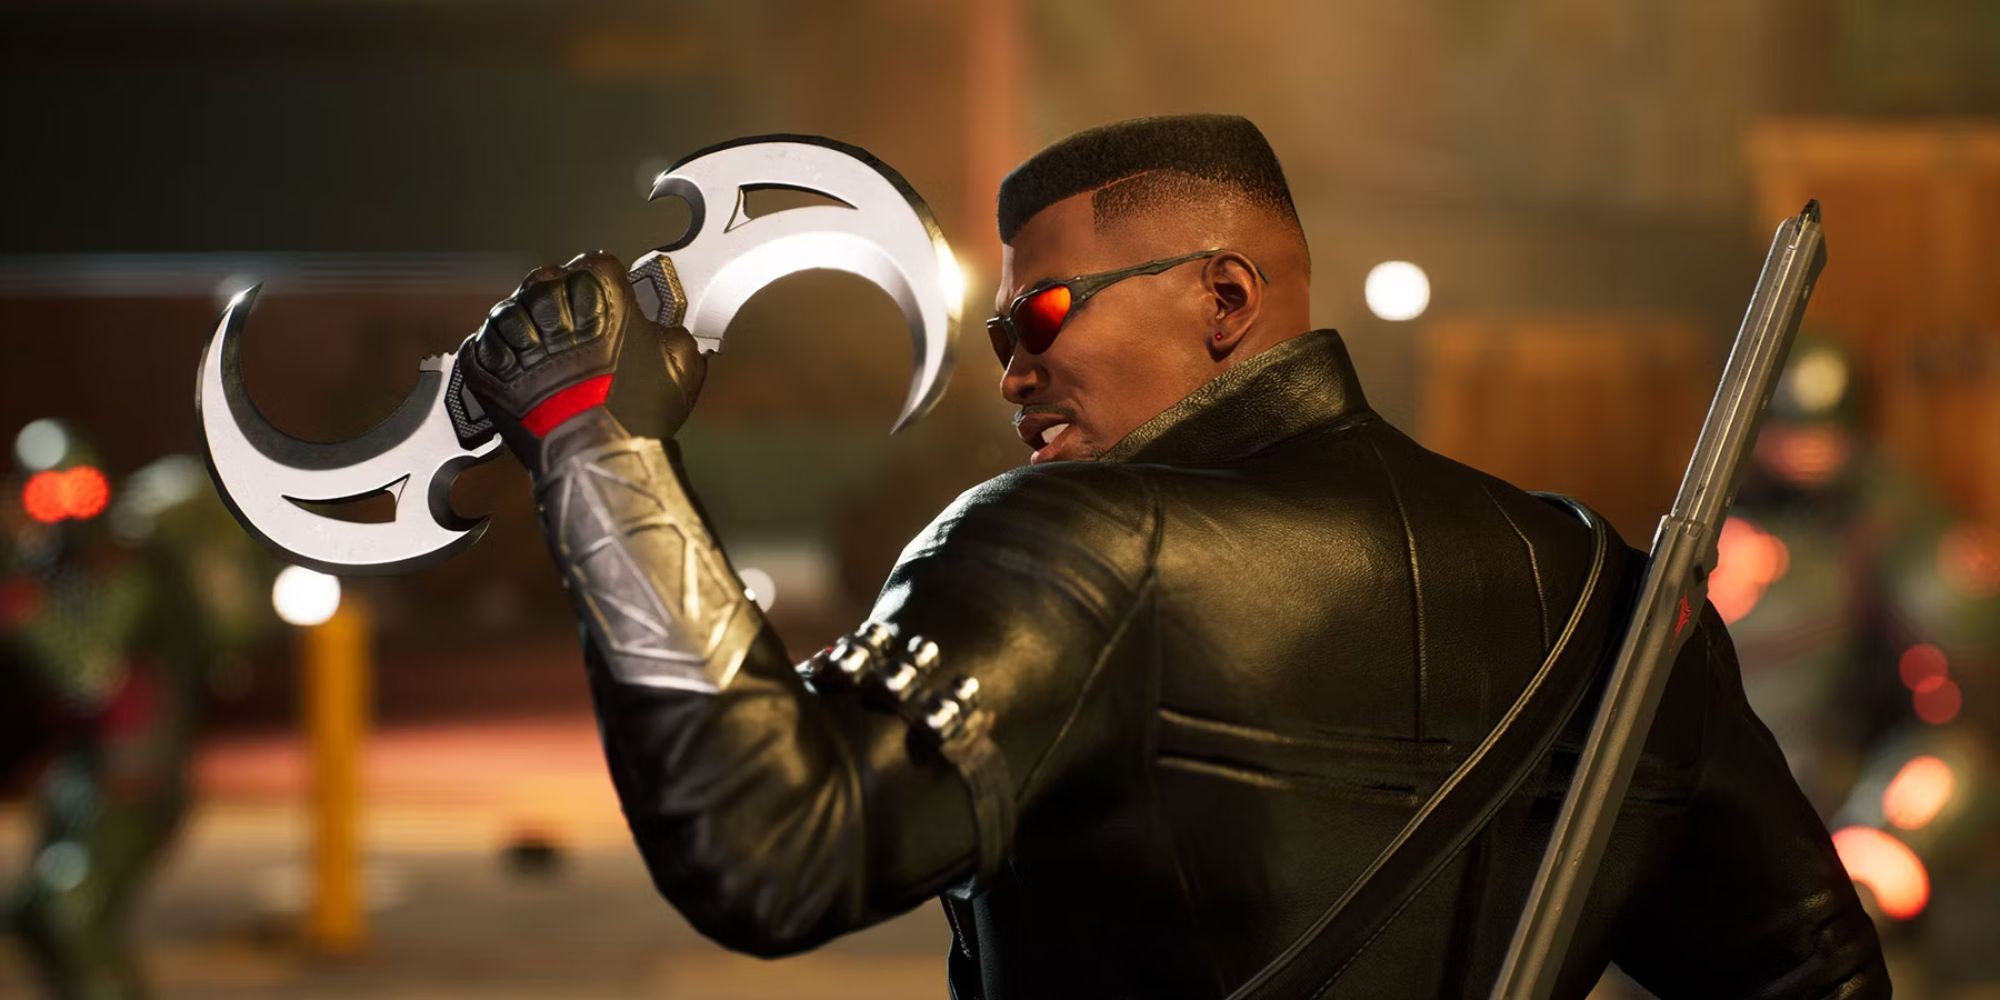 Blade has vampire abilities that cause great damage in Marvel's Midnight Suns